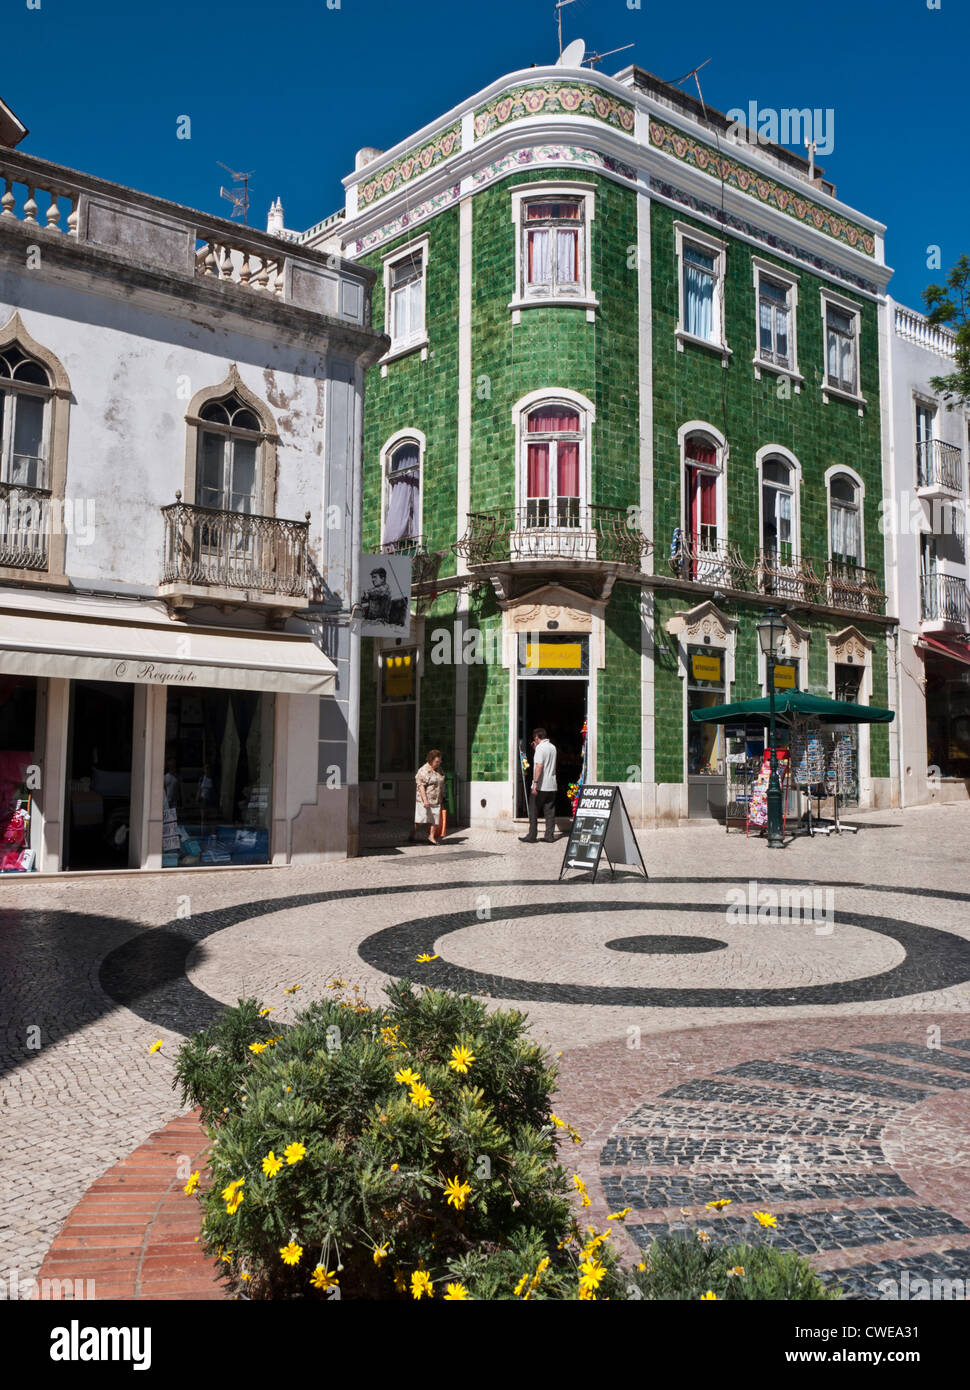 Colourful building covered in green tiles in Lagos, Portugal. Stock Photo